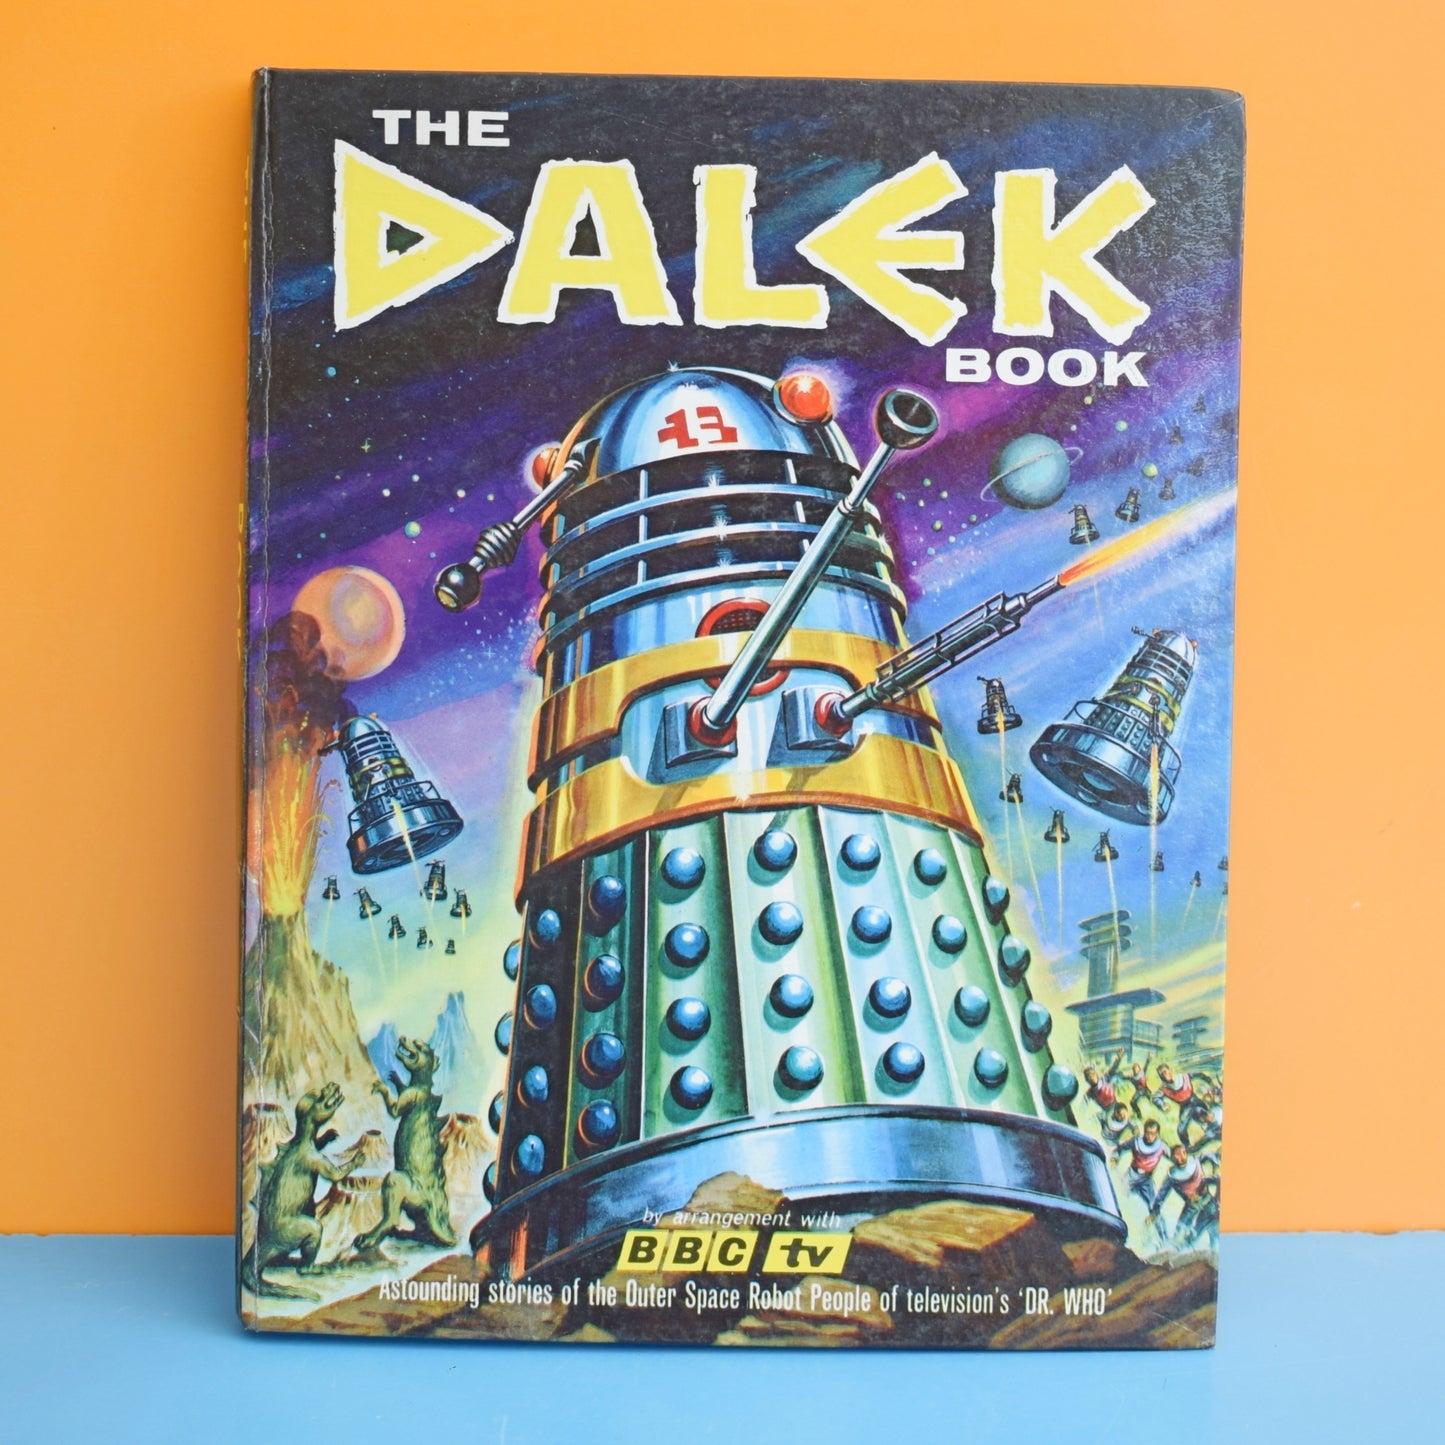 Vintage 1970s/ 80s Doctor Who Books